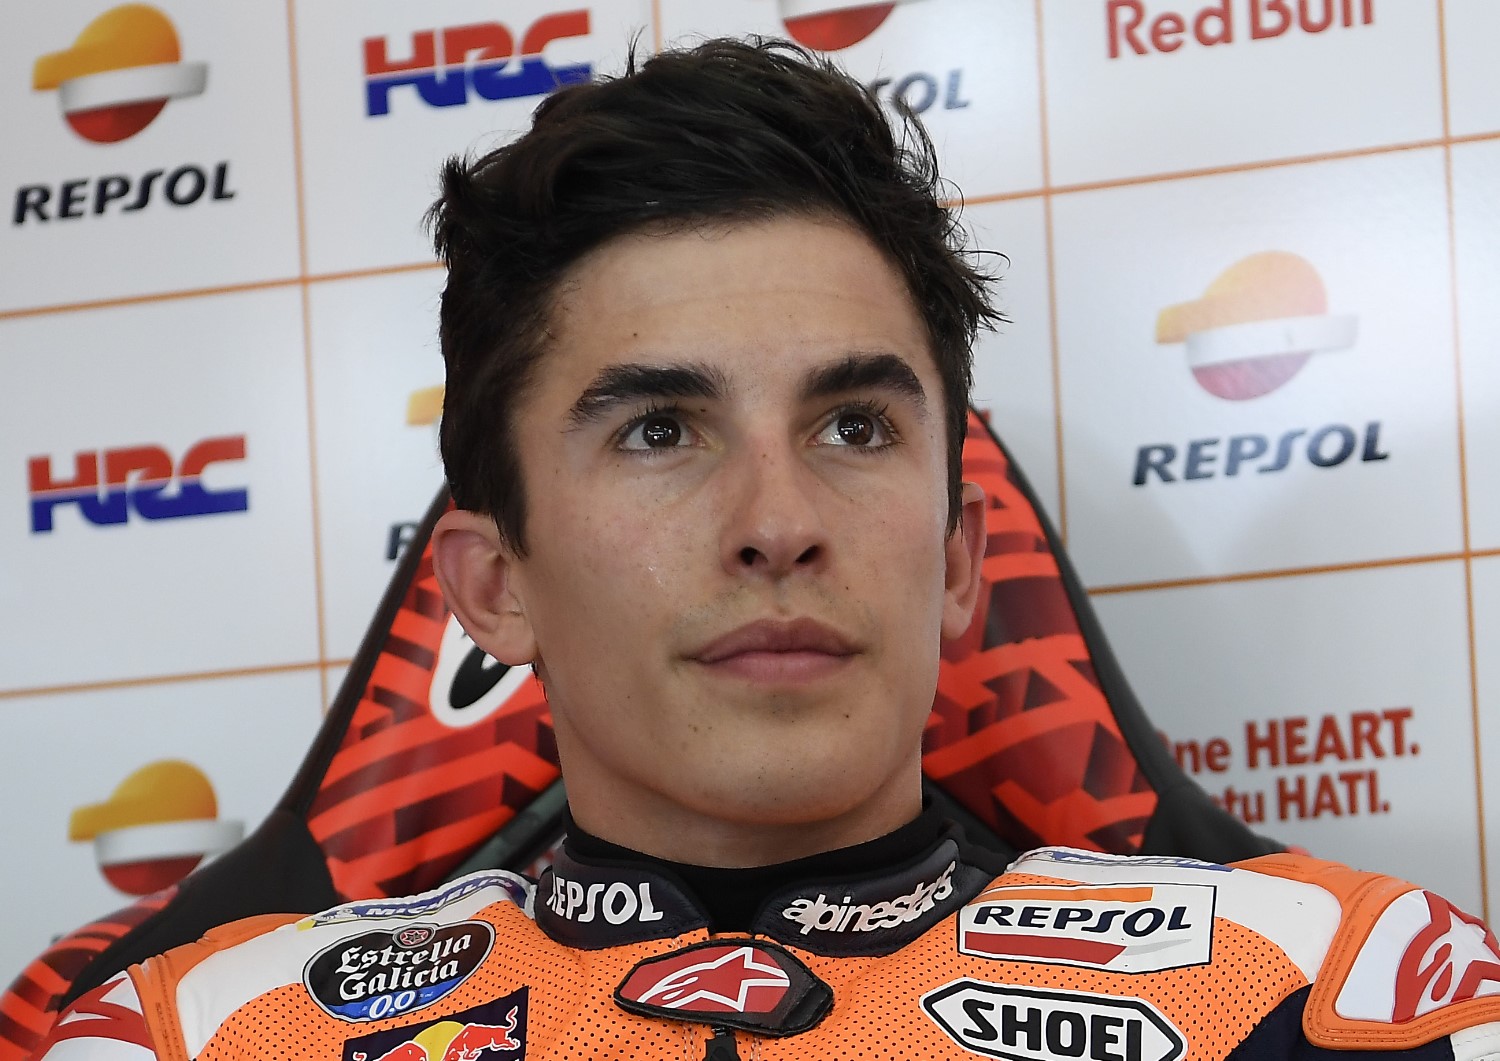 Marquez relaxes in garage